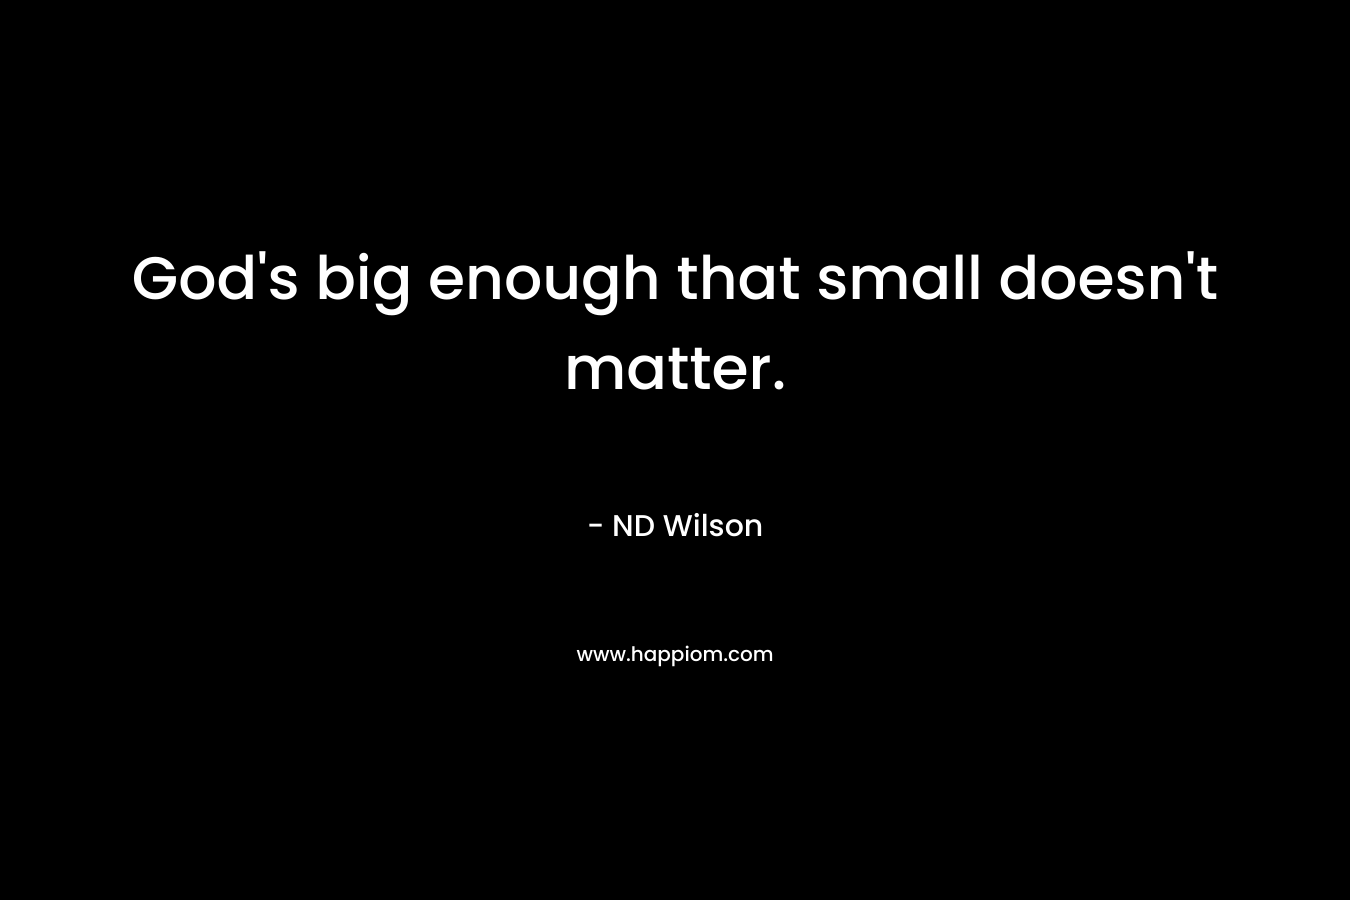 God's big enough that small doesn't matter.